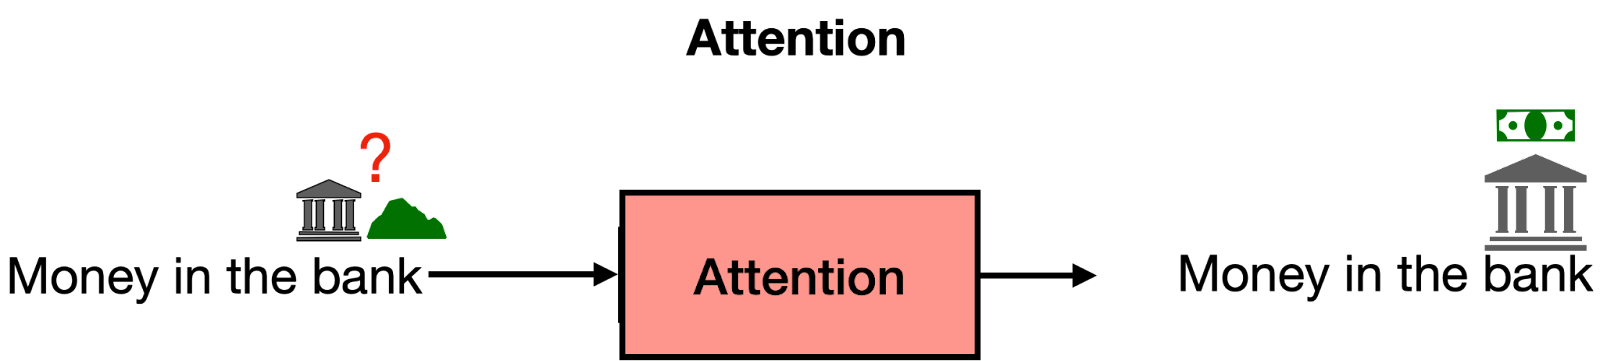 Attention helps give context to each word, based on the other words in the sentece (or text).